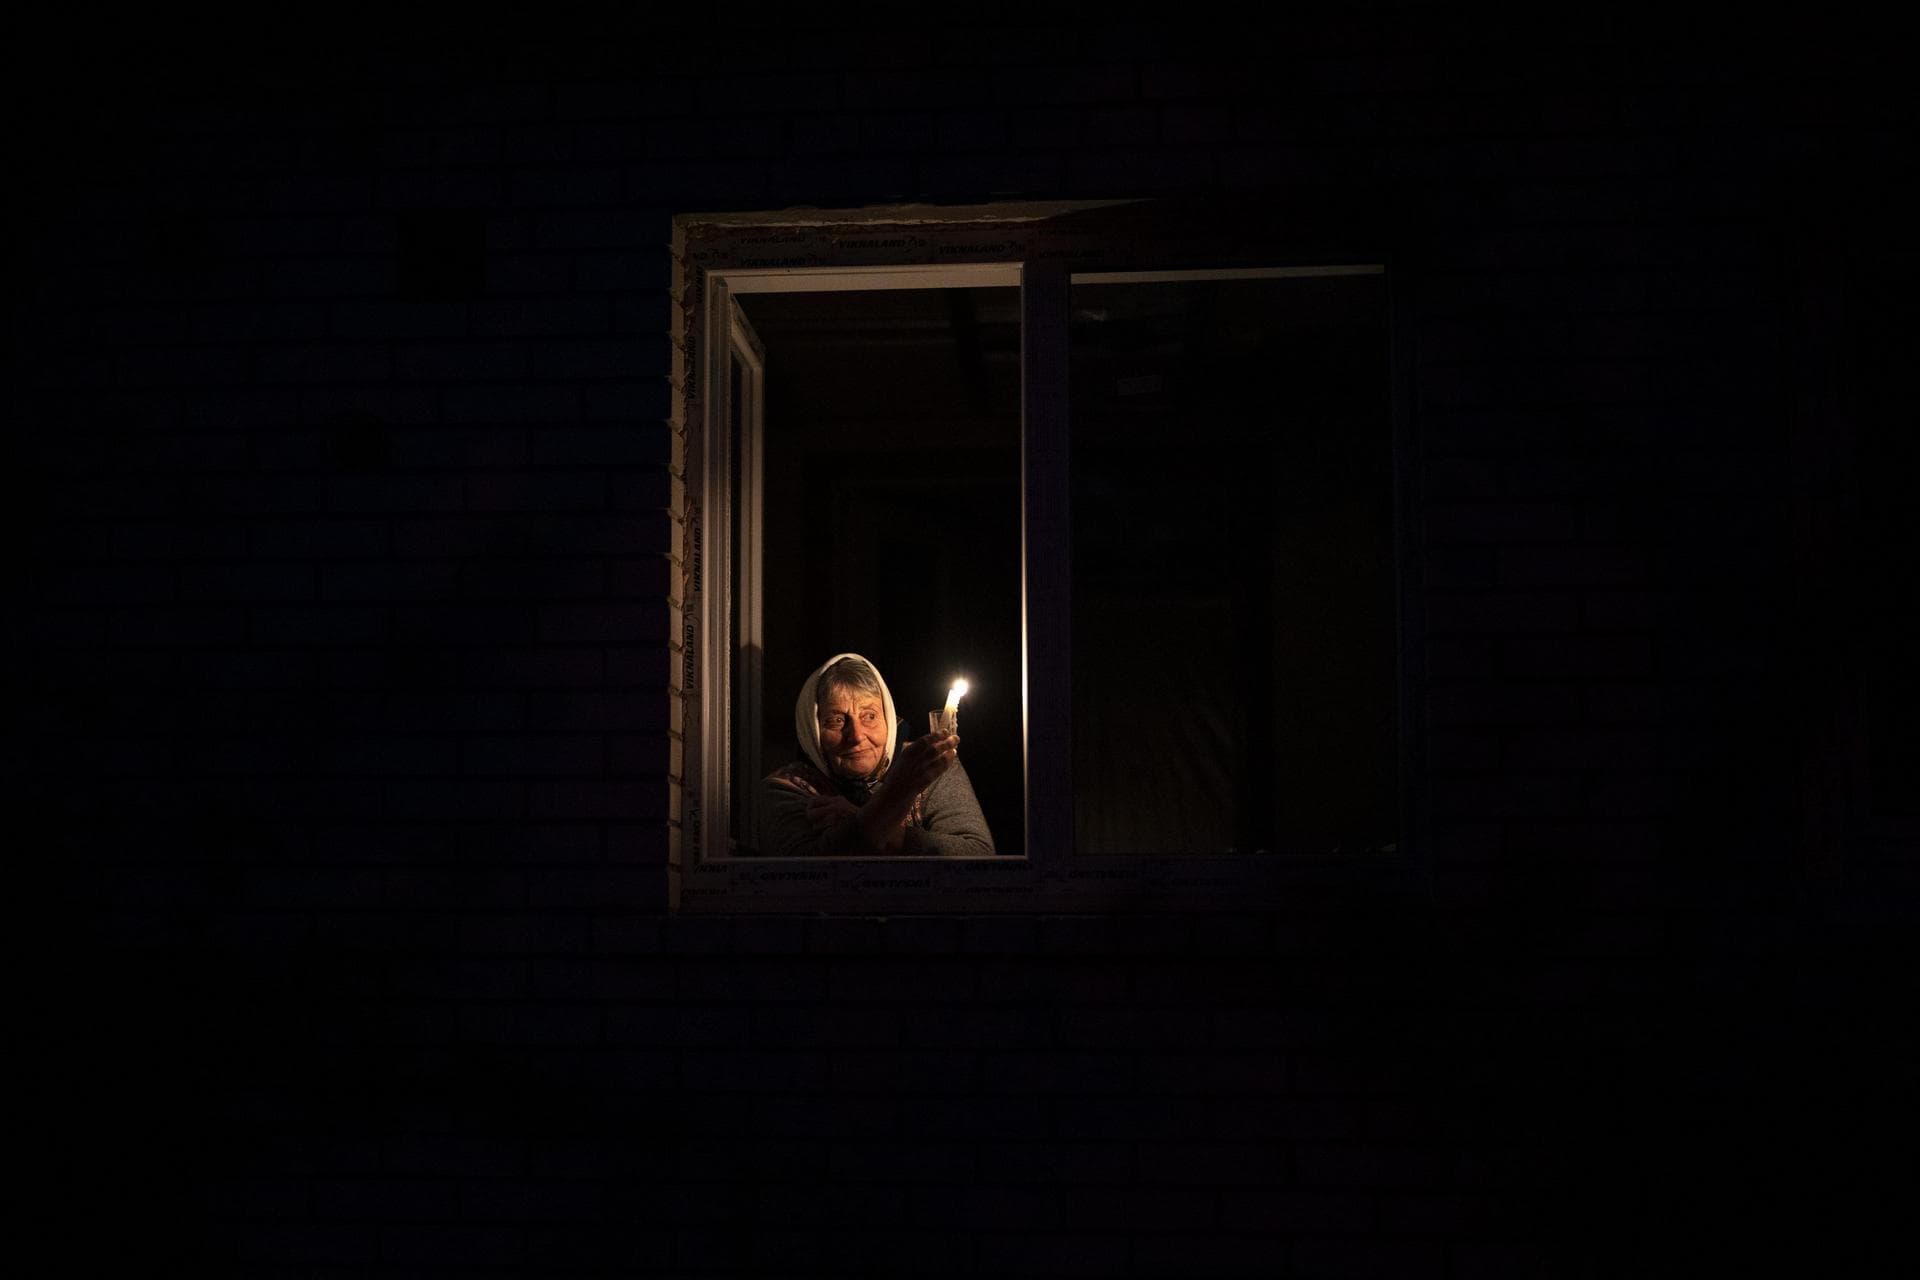 Catherine looks out the window while holding a candle for light inside her house during a power outage, in Borodyanka